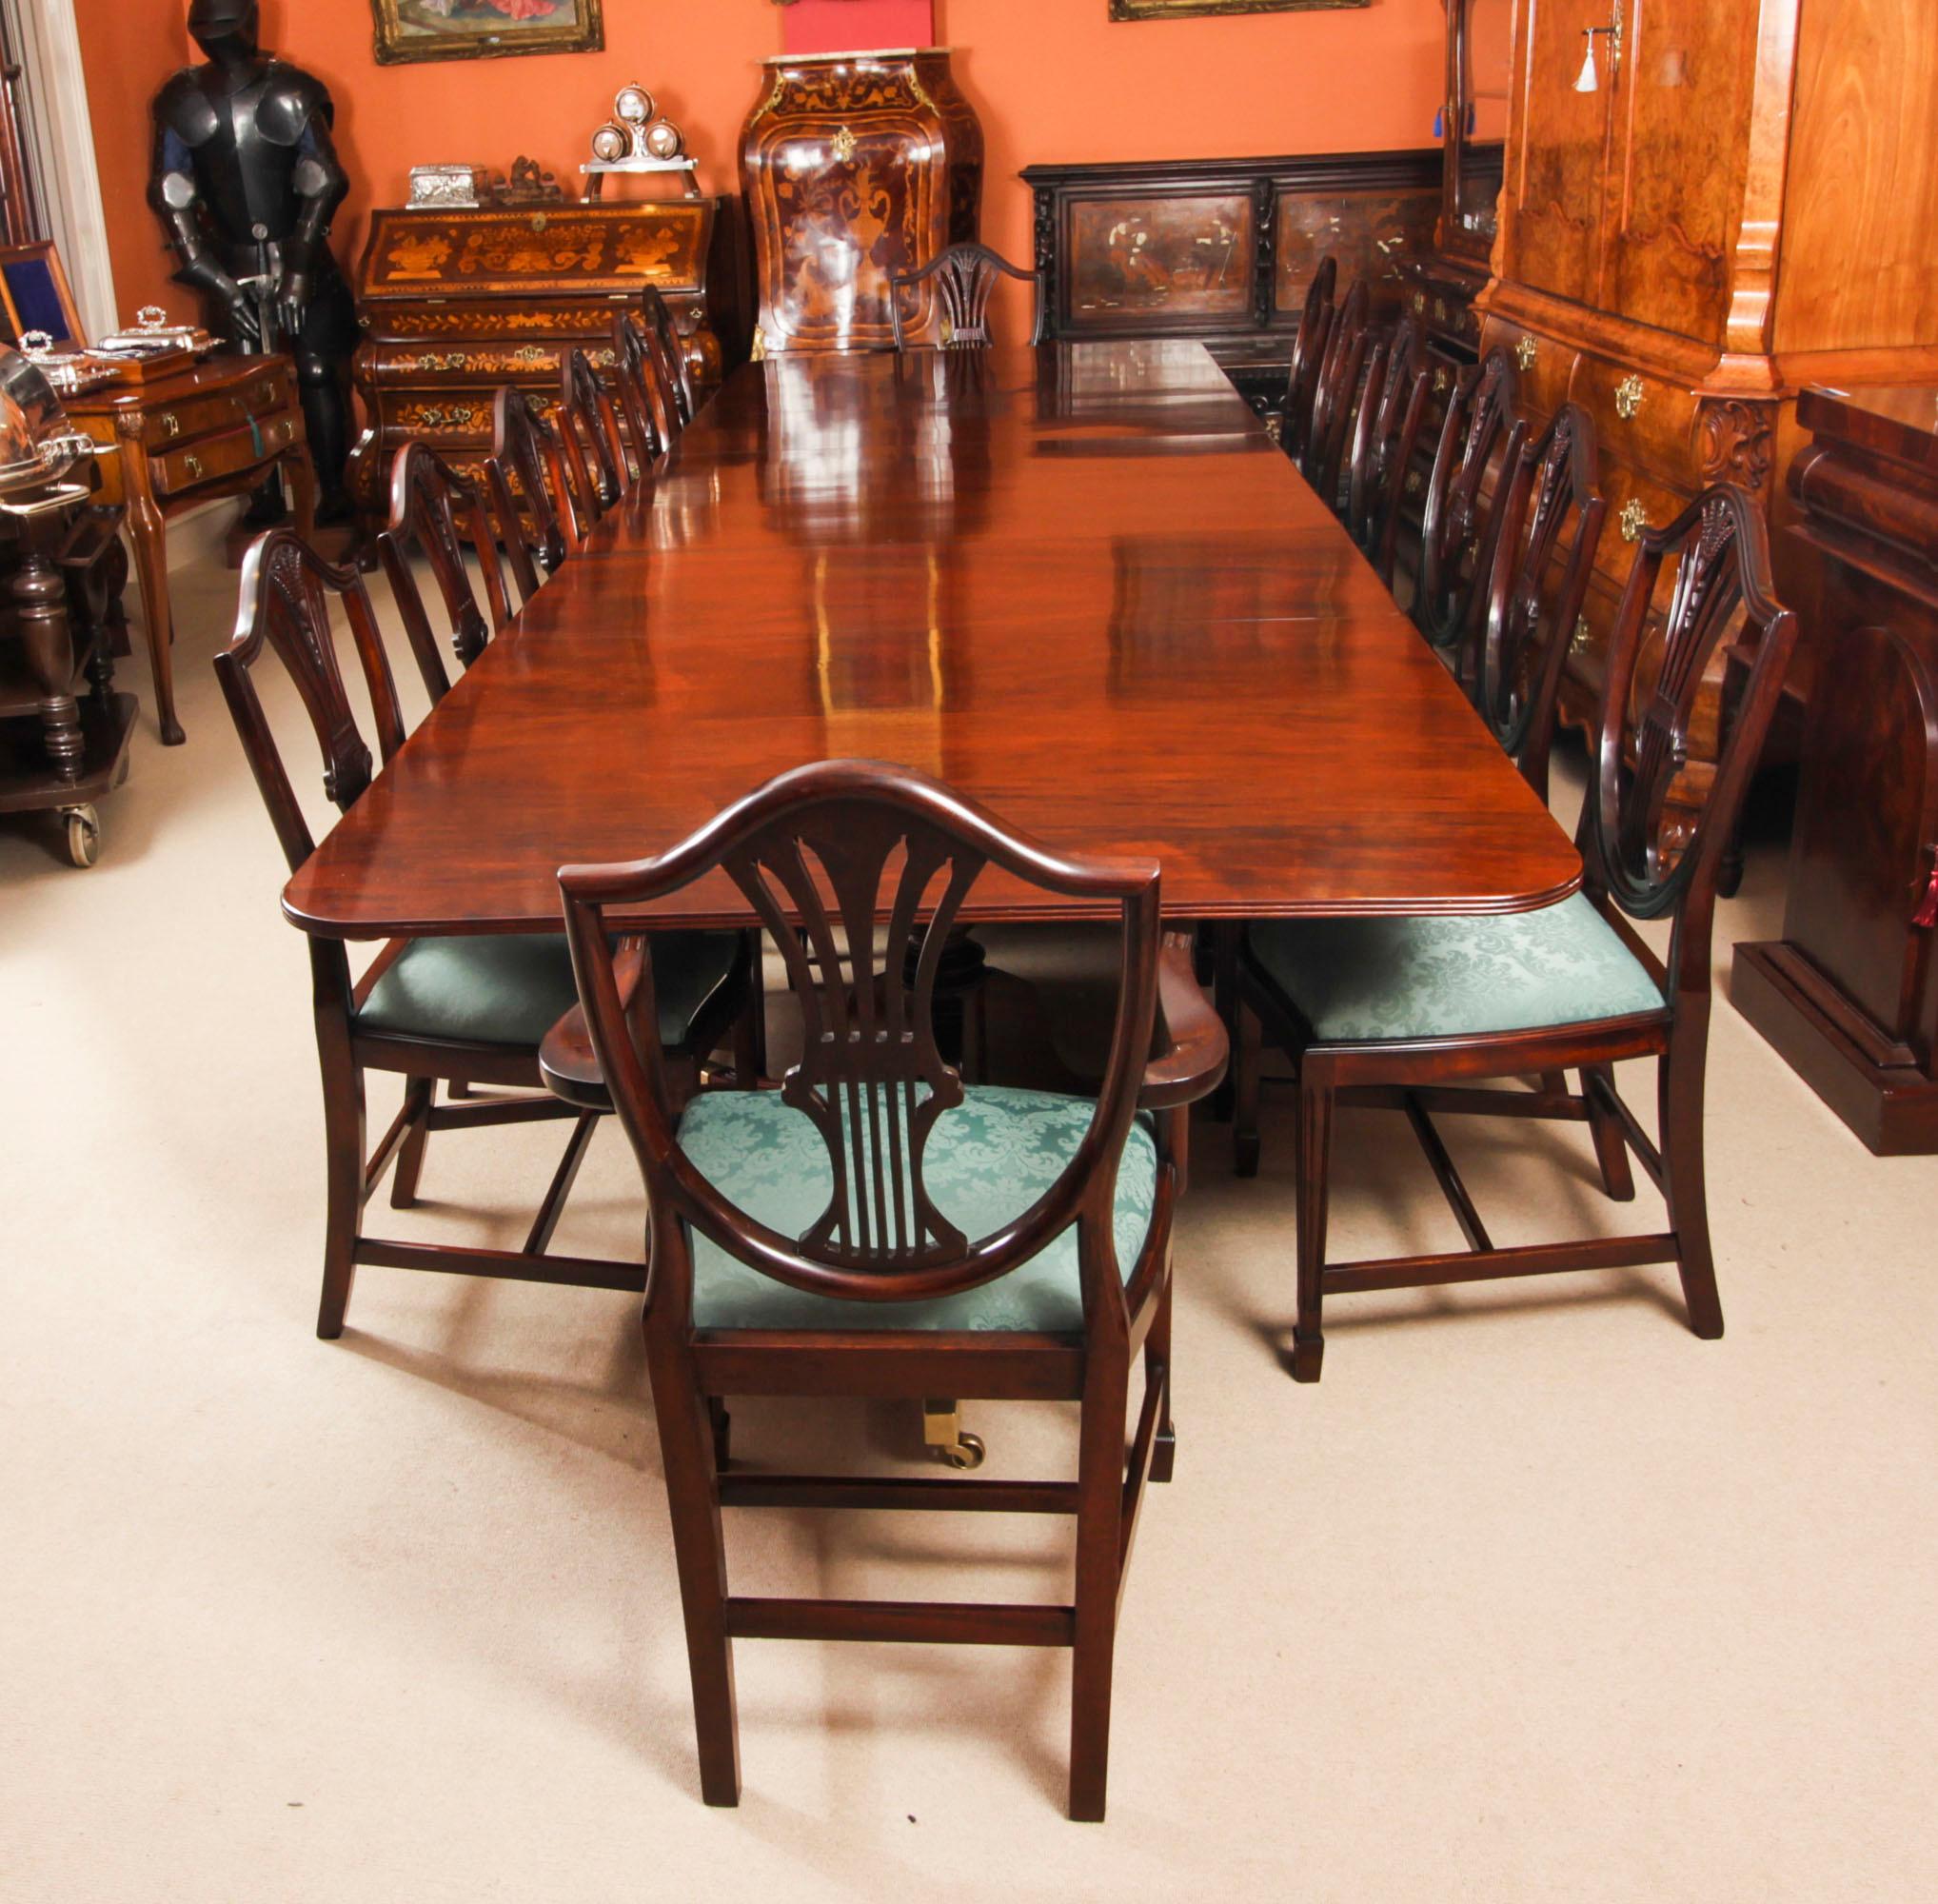 Antique 14ft Flame Mahogany Regency Revival Triple Pillar Dining Table 19th C In Good Condition For Sale In London, GB